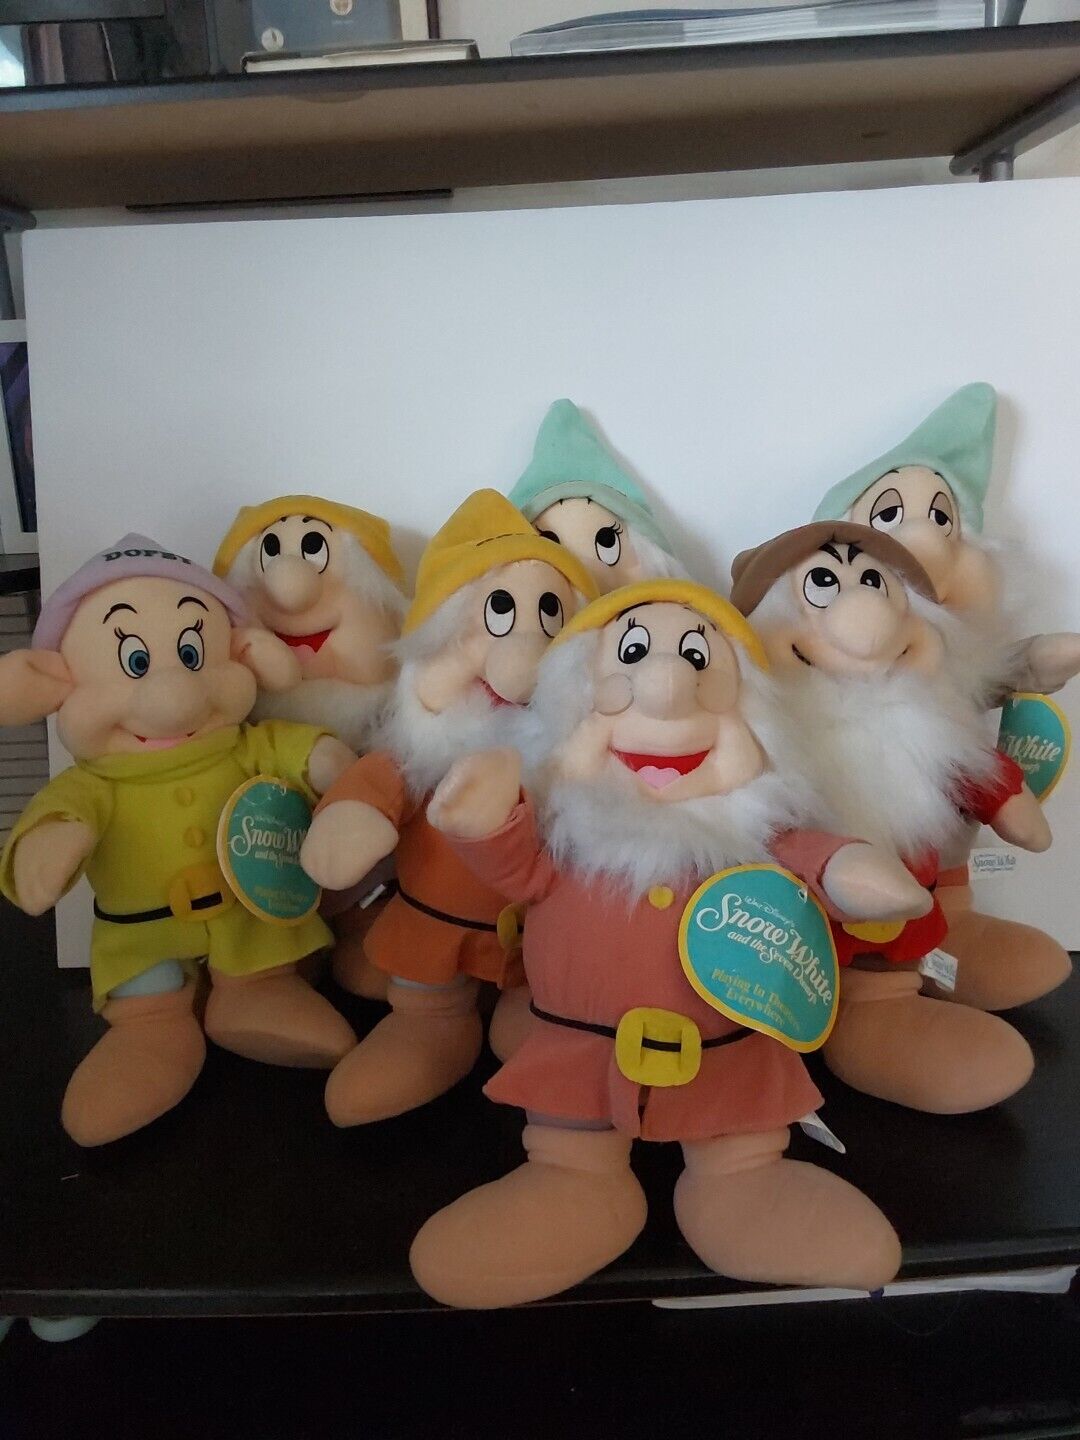  All Seven Dwarfs 12 Inch Plushies From 1997 Advertising The SnowWhite Movie